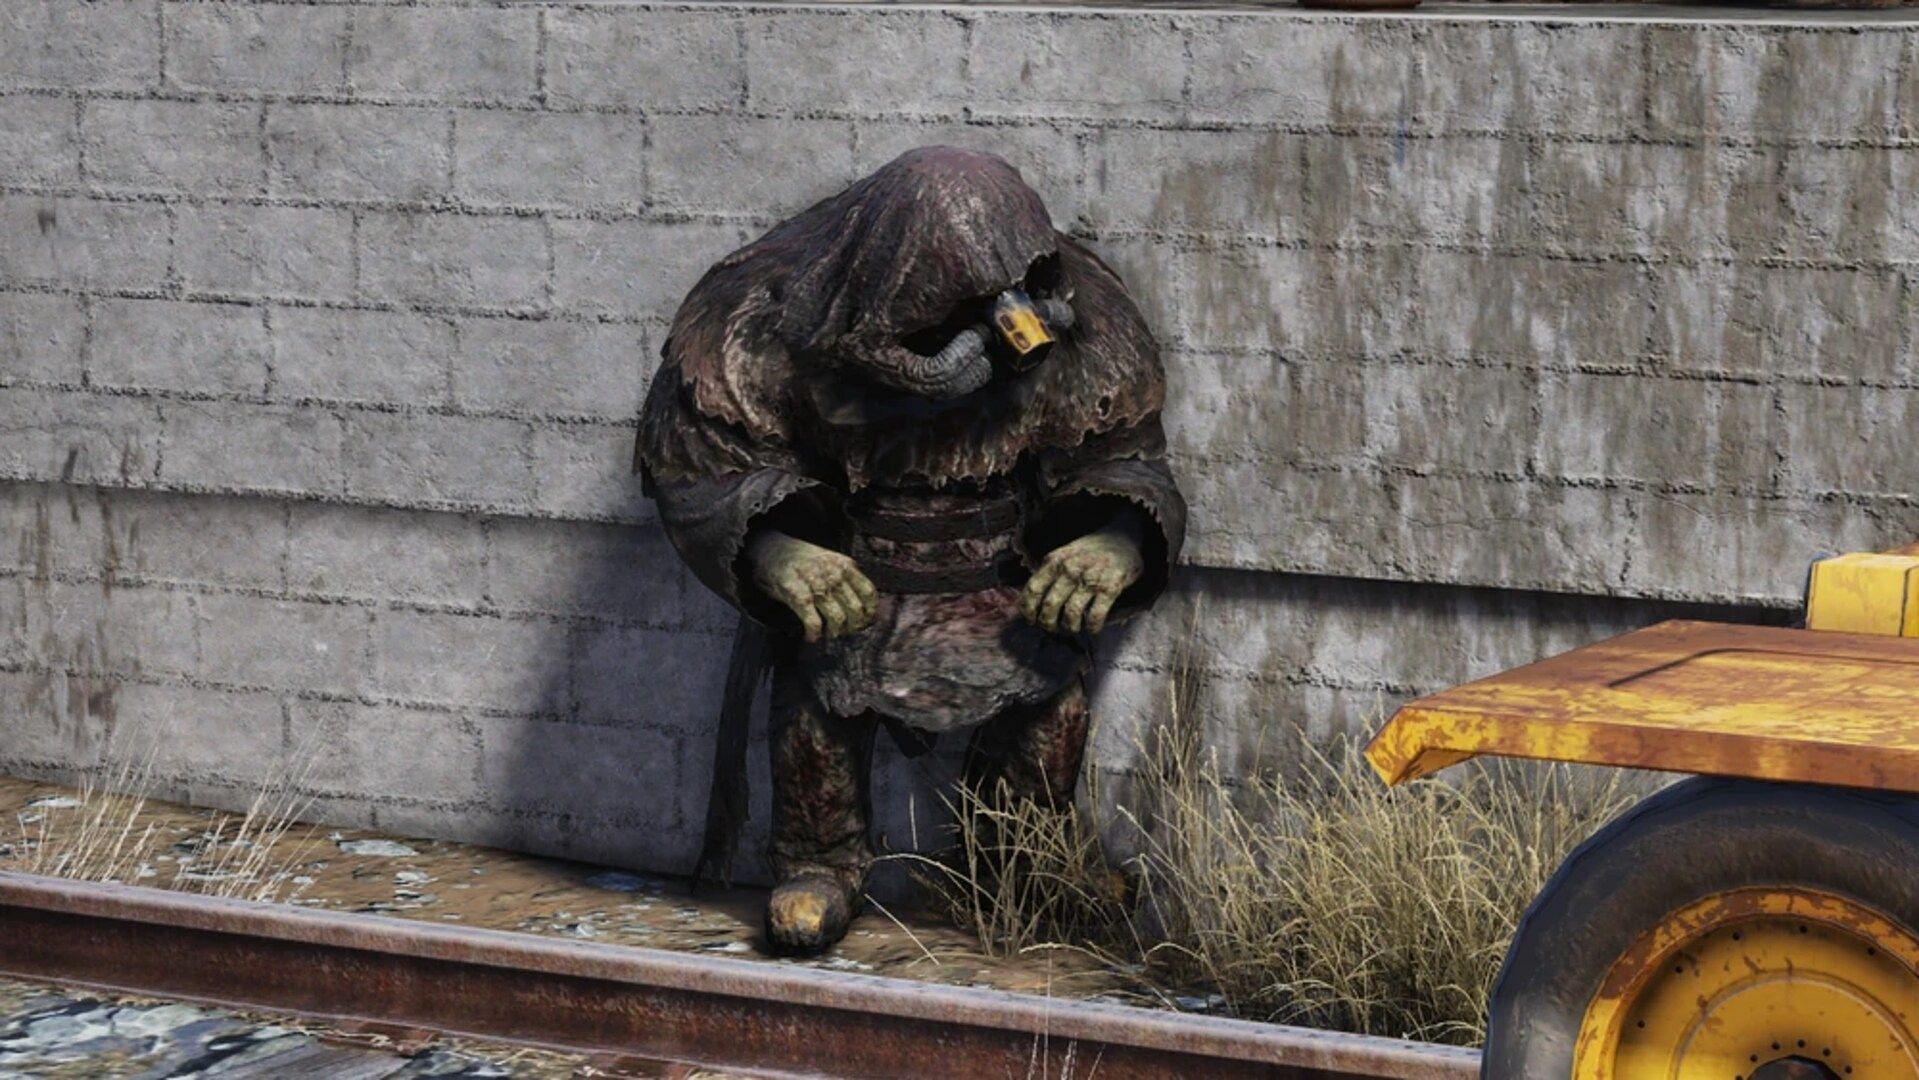 The Mole Miners in Fallout 76 (Image via Bethesda)